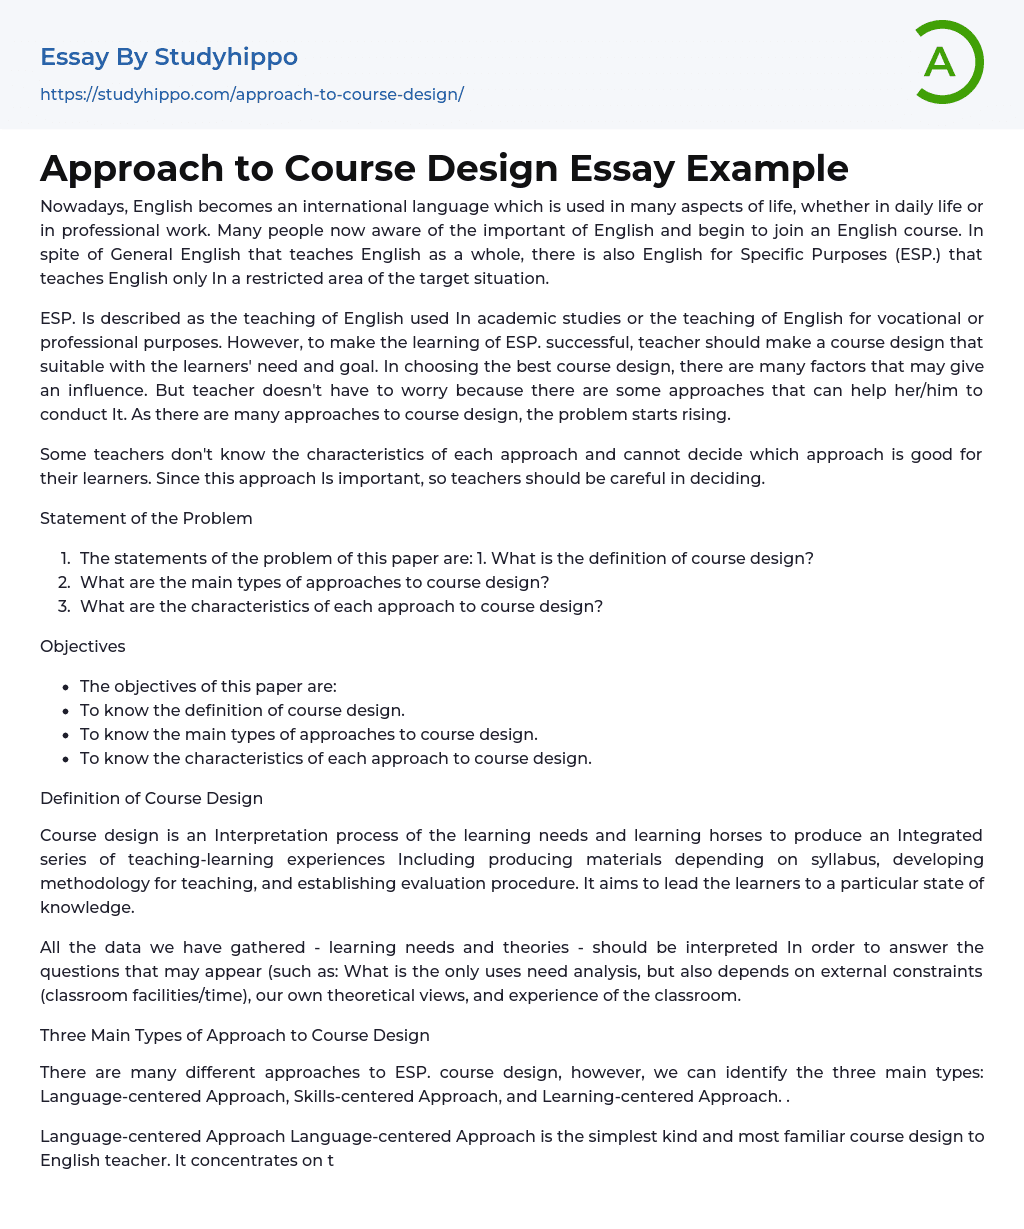 Approach to Course Design Essay Example